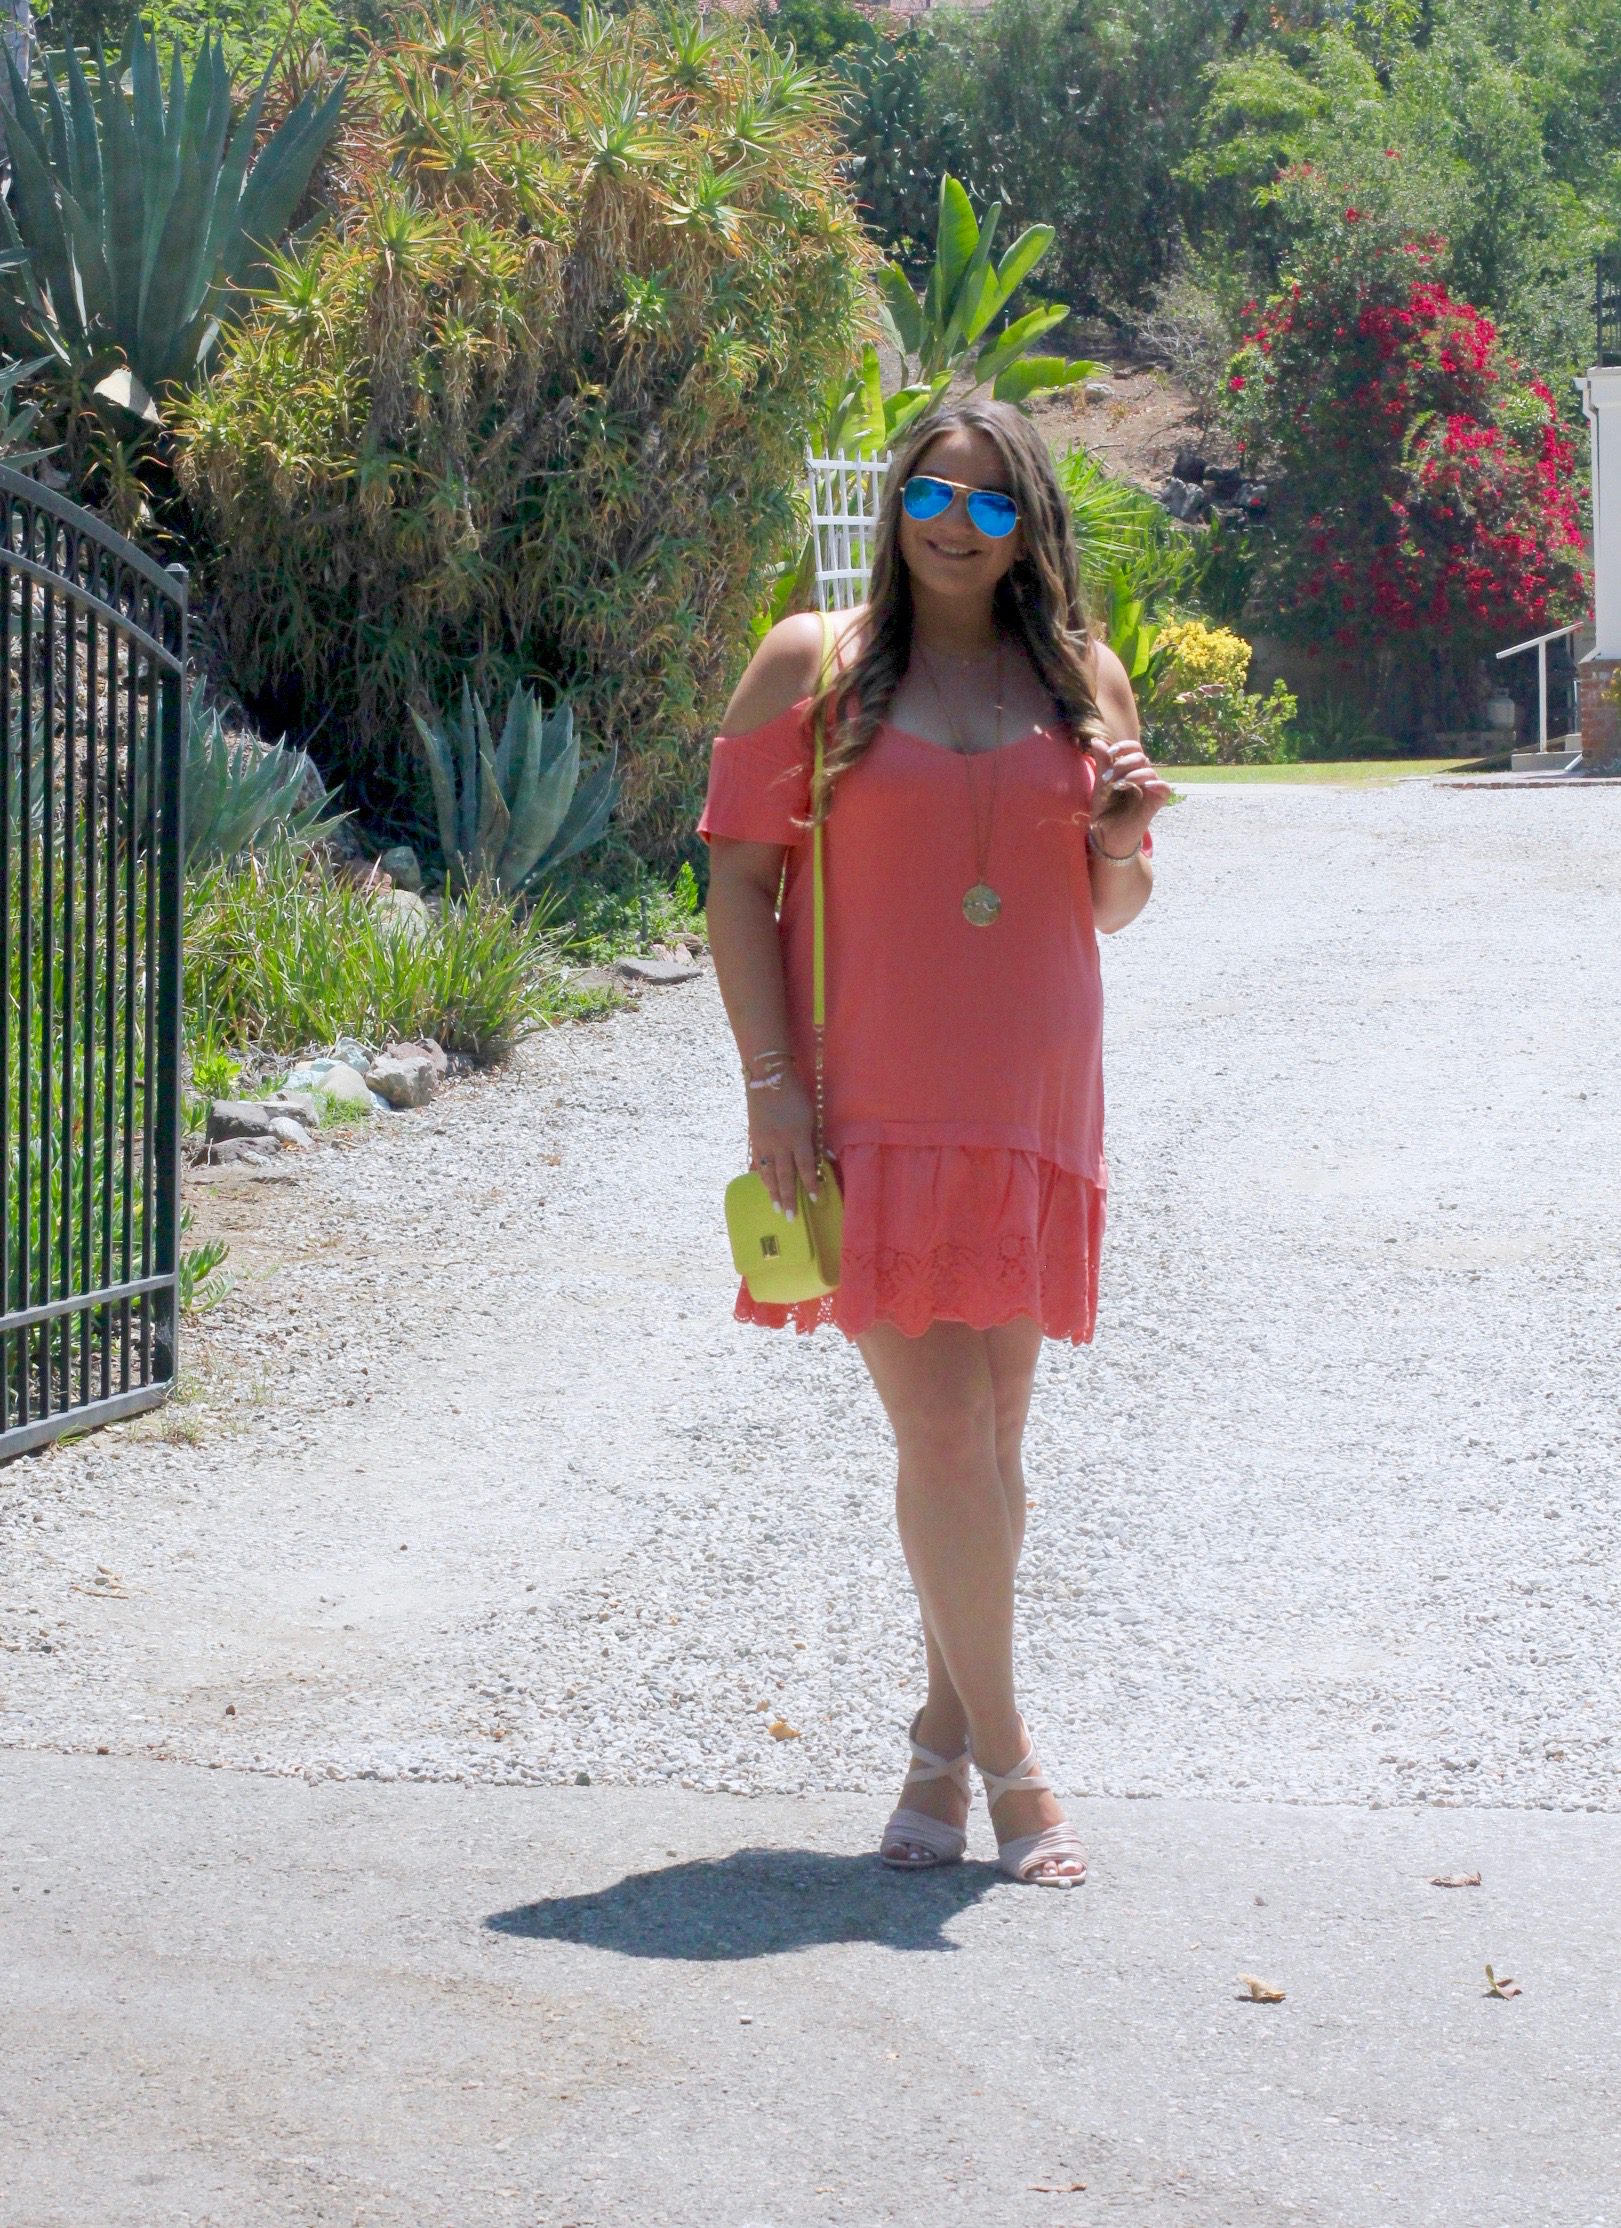 missyonmadison, melissa tierney, coral dress, coral off the shoulder dress, fashion blogger, la blogger, coral heels, coral block heels, gigi ny, yellow gigi ny bag, neon yellow gigi ny bag, ray bans, blue aviators, mirrored aviators, coral dress, hair goals, summer style, la style, how to wear color, pop of color, style blogger,